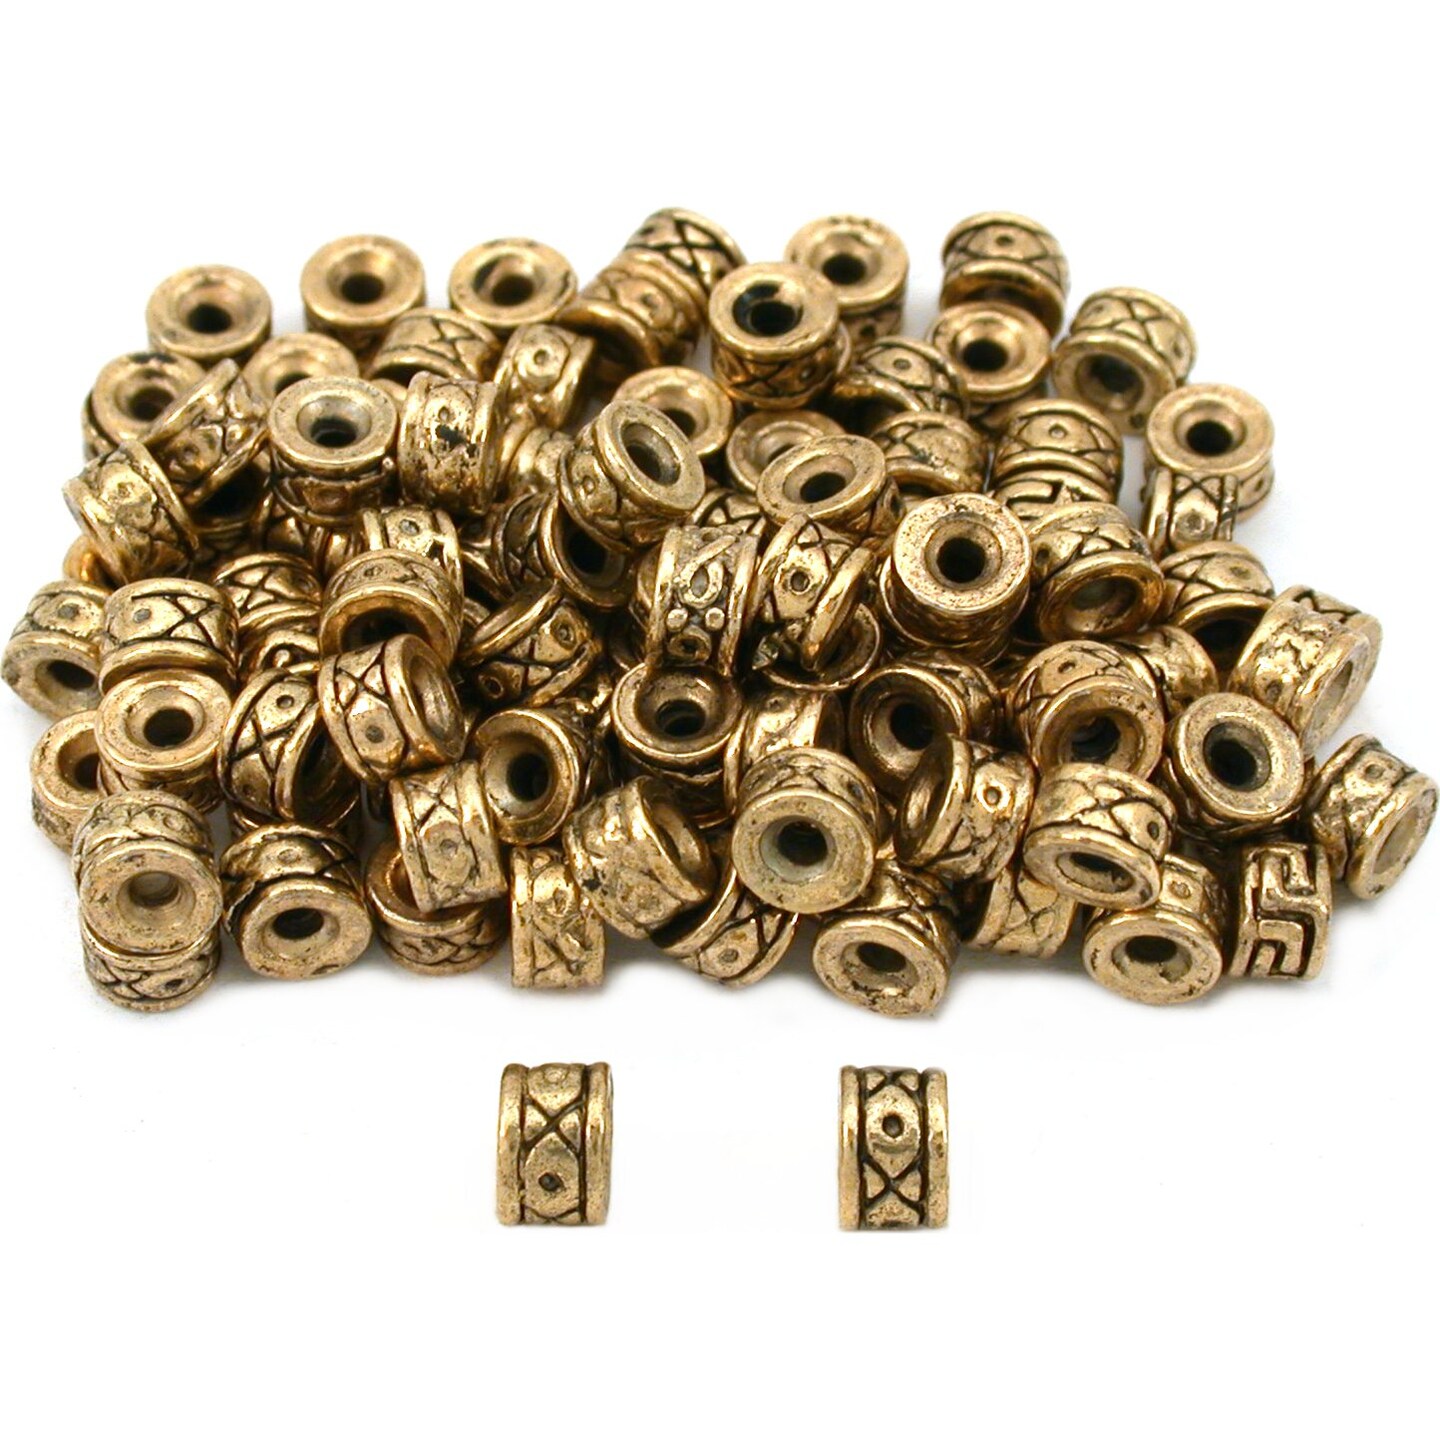 Spacer Bali Beads Antique Gold Plated 5mm Approx 100